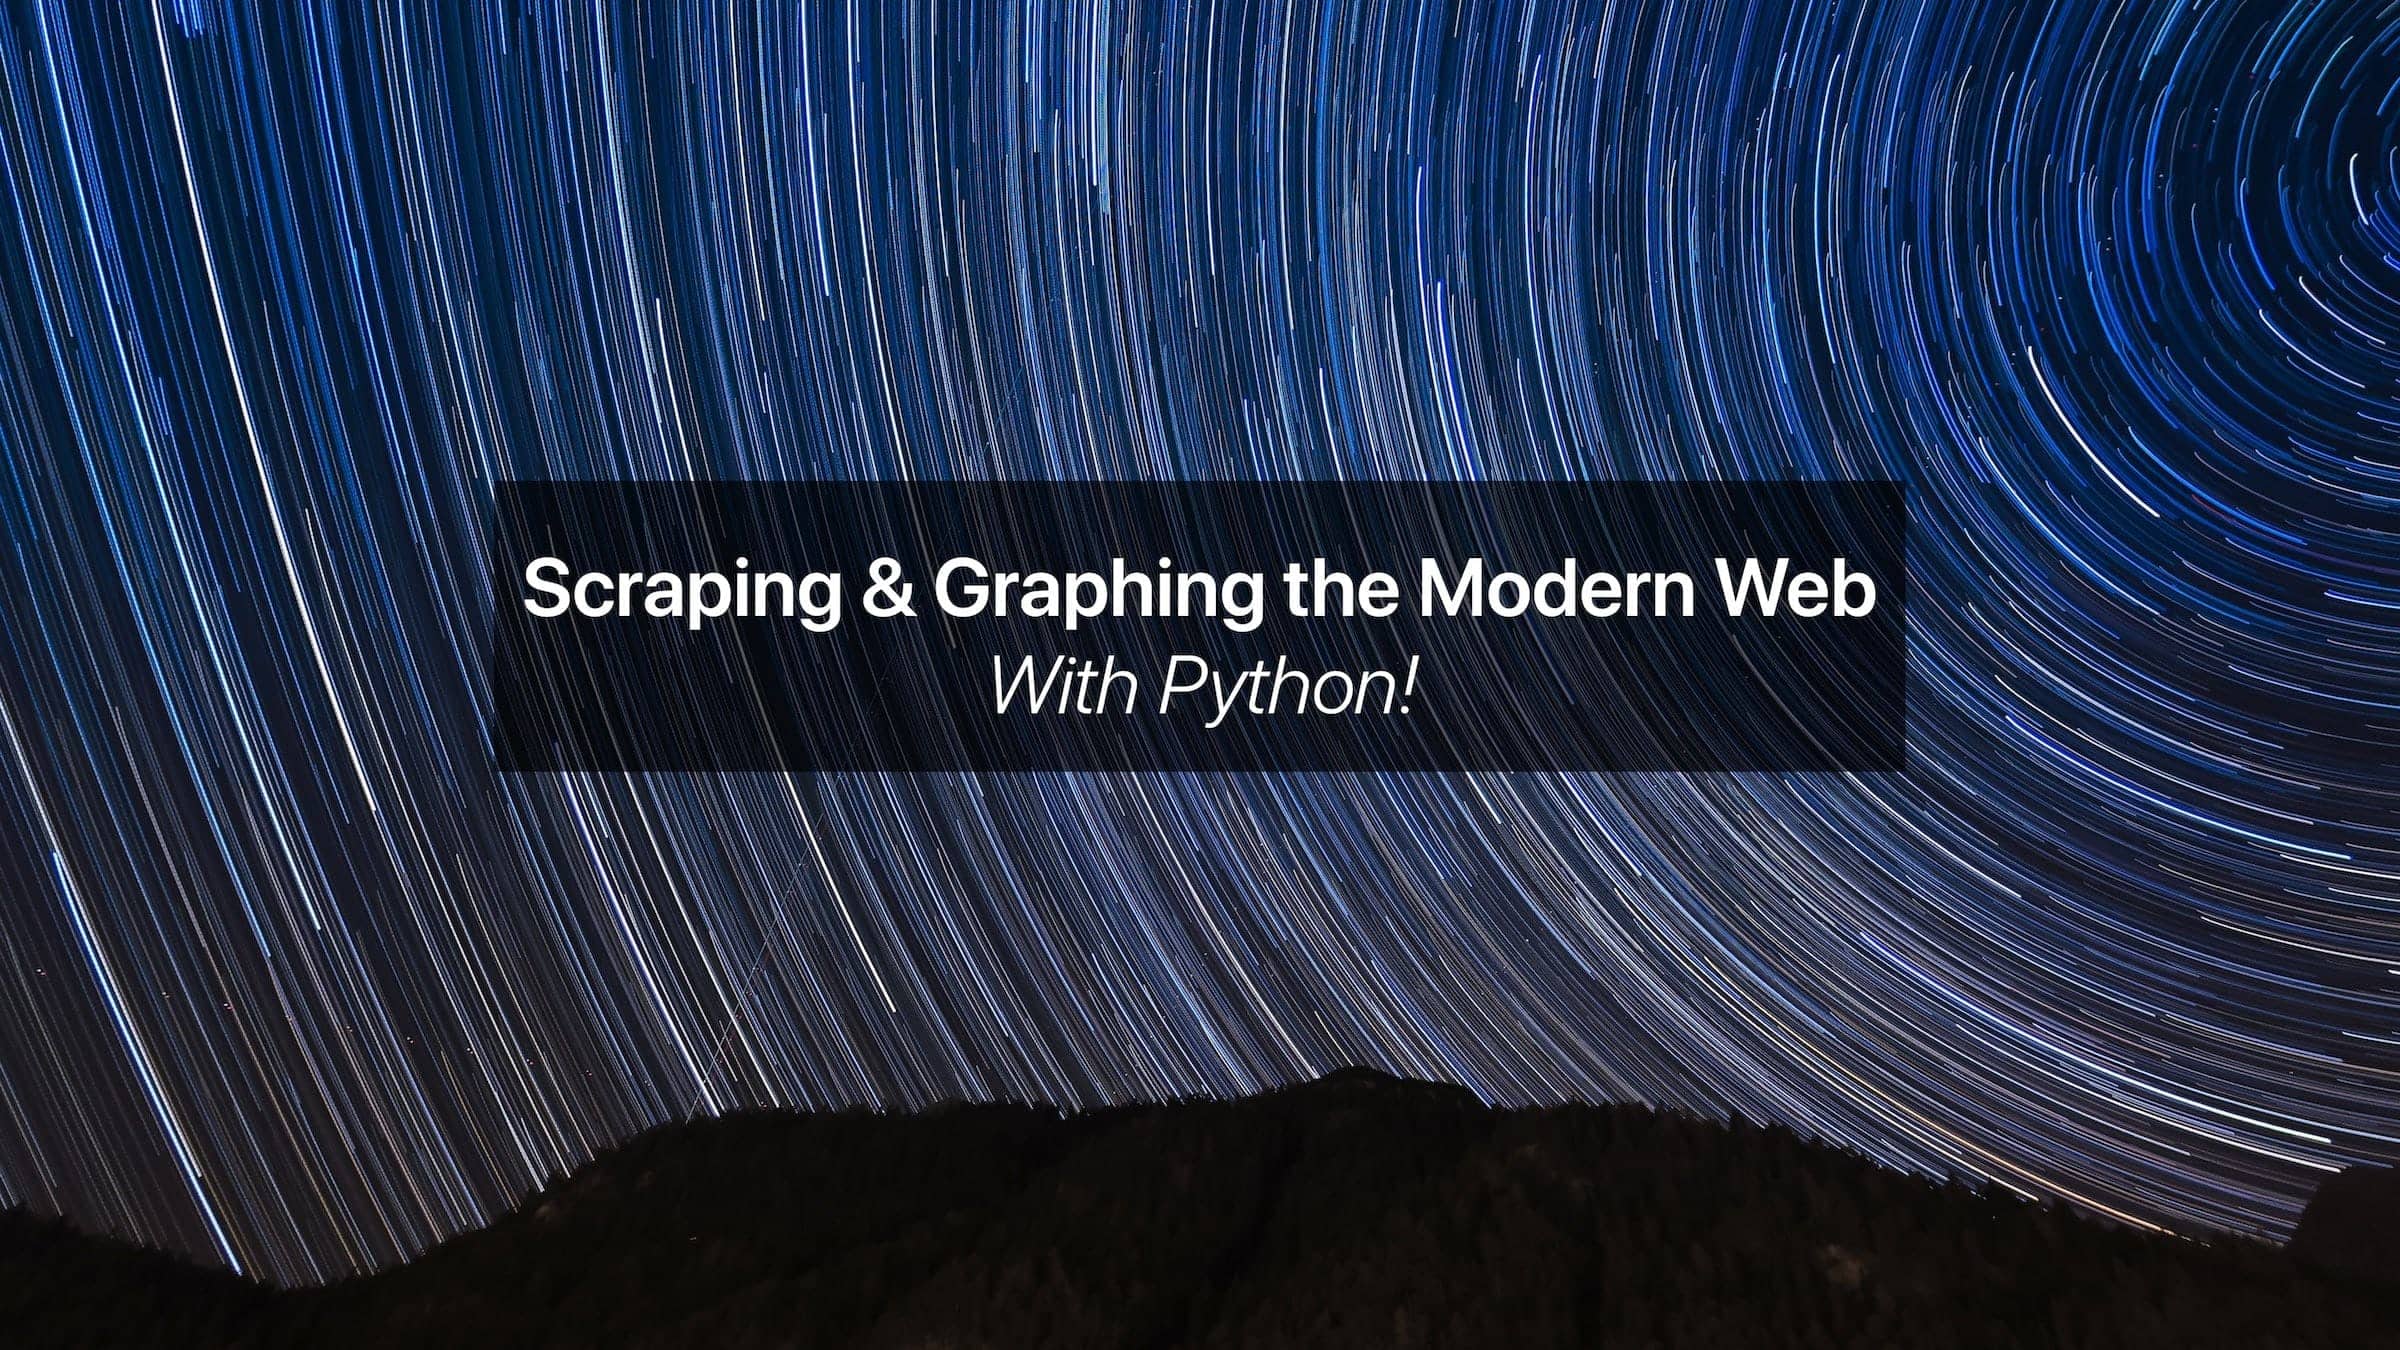 Scraping and Graphing the Web with Python: Part 1